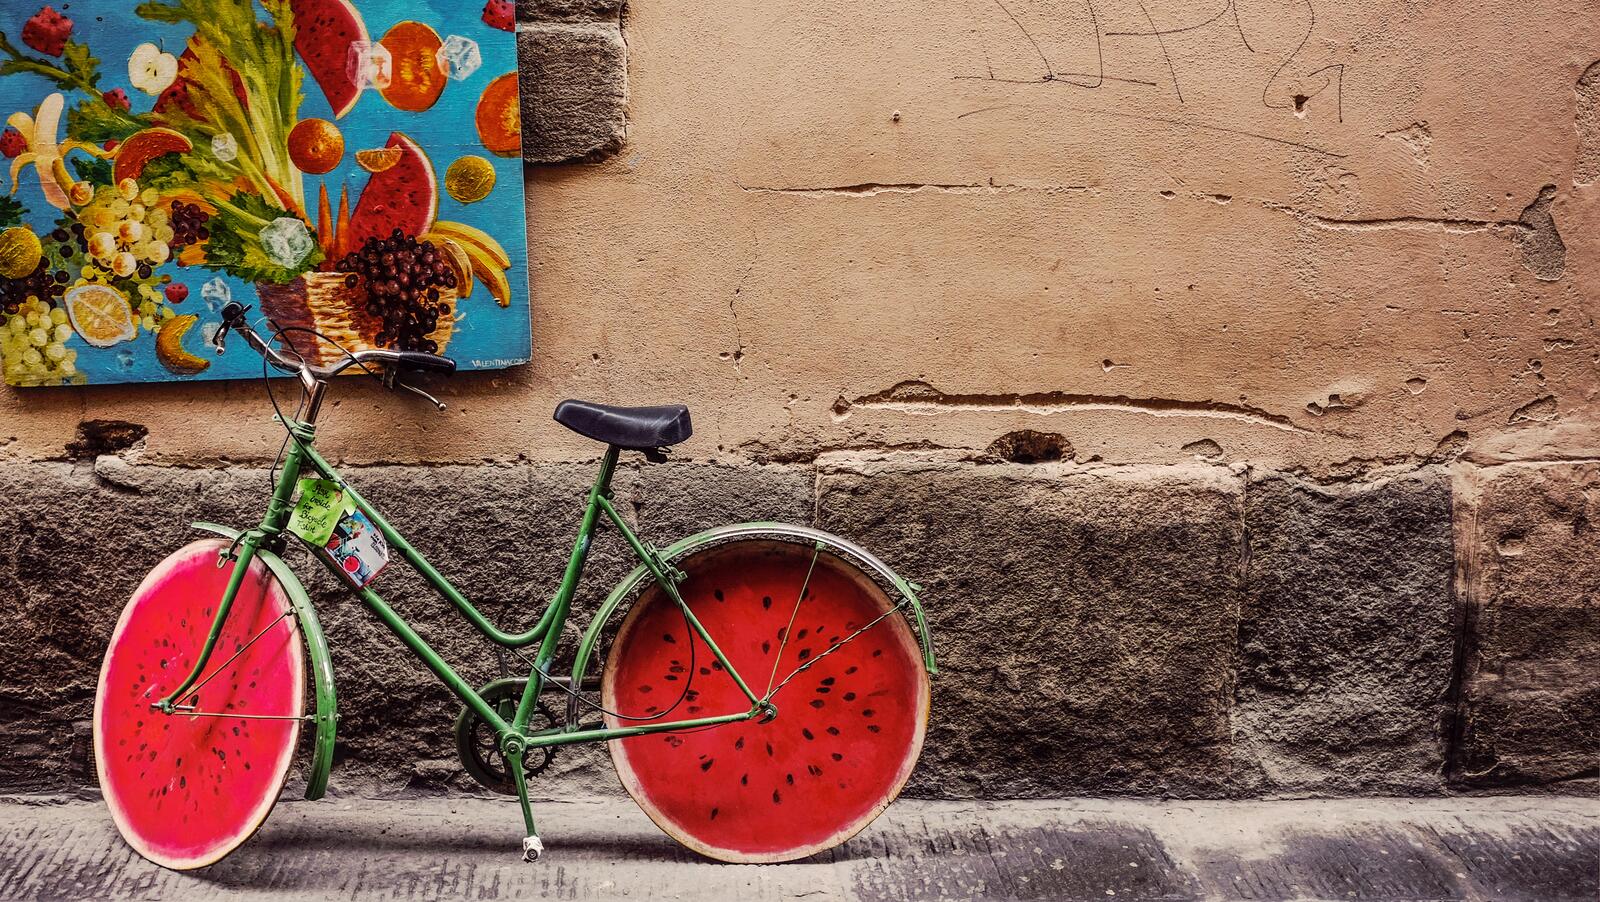 Wallpapers Italy watermelon fantastic on the desktop